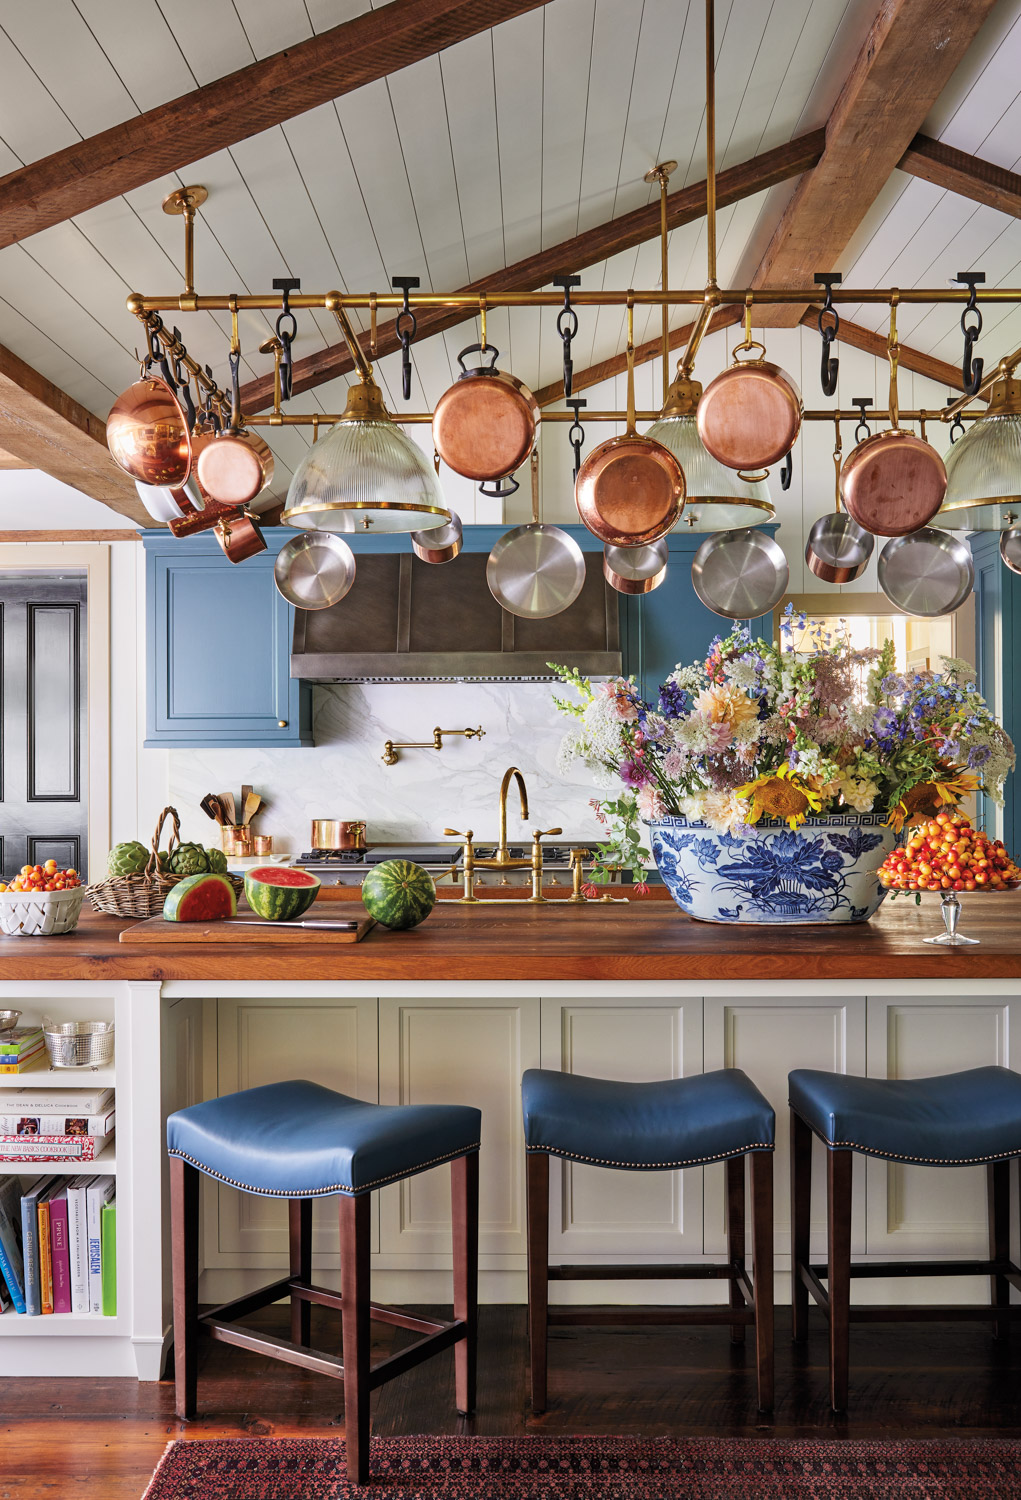 mayrland kitchen with blue cabinets and copper pots